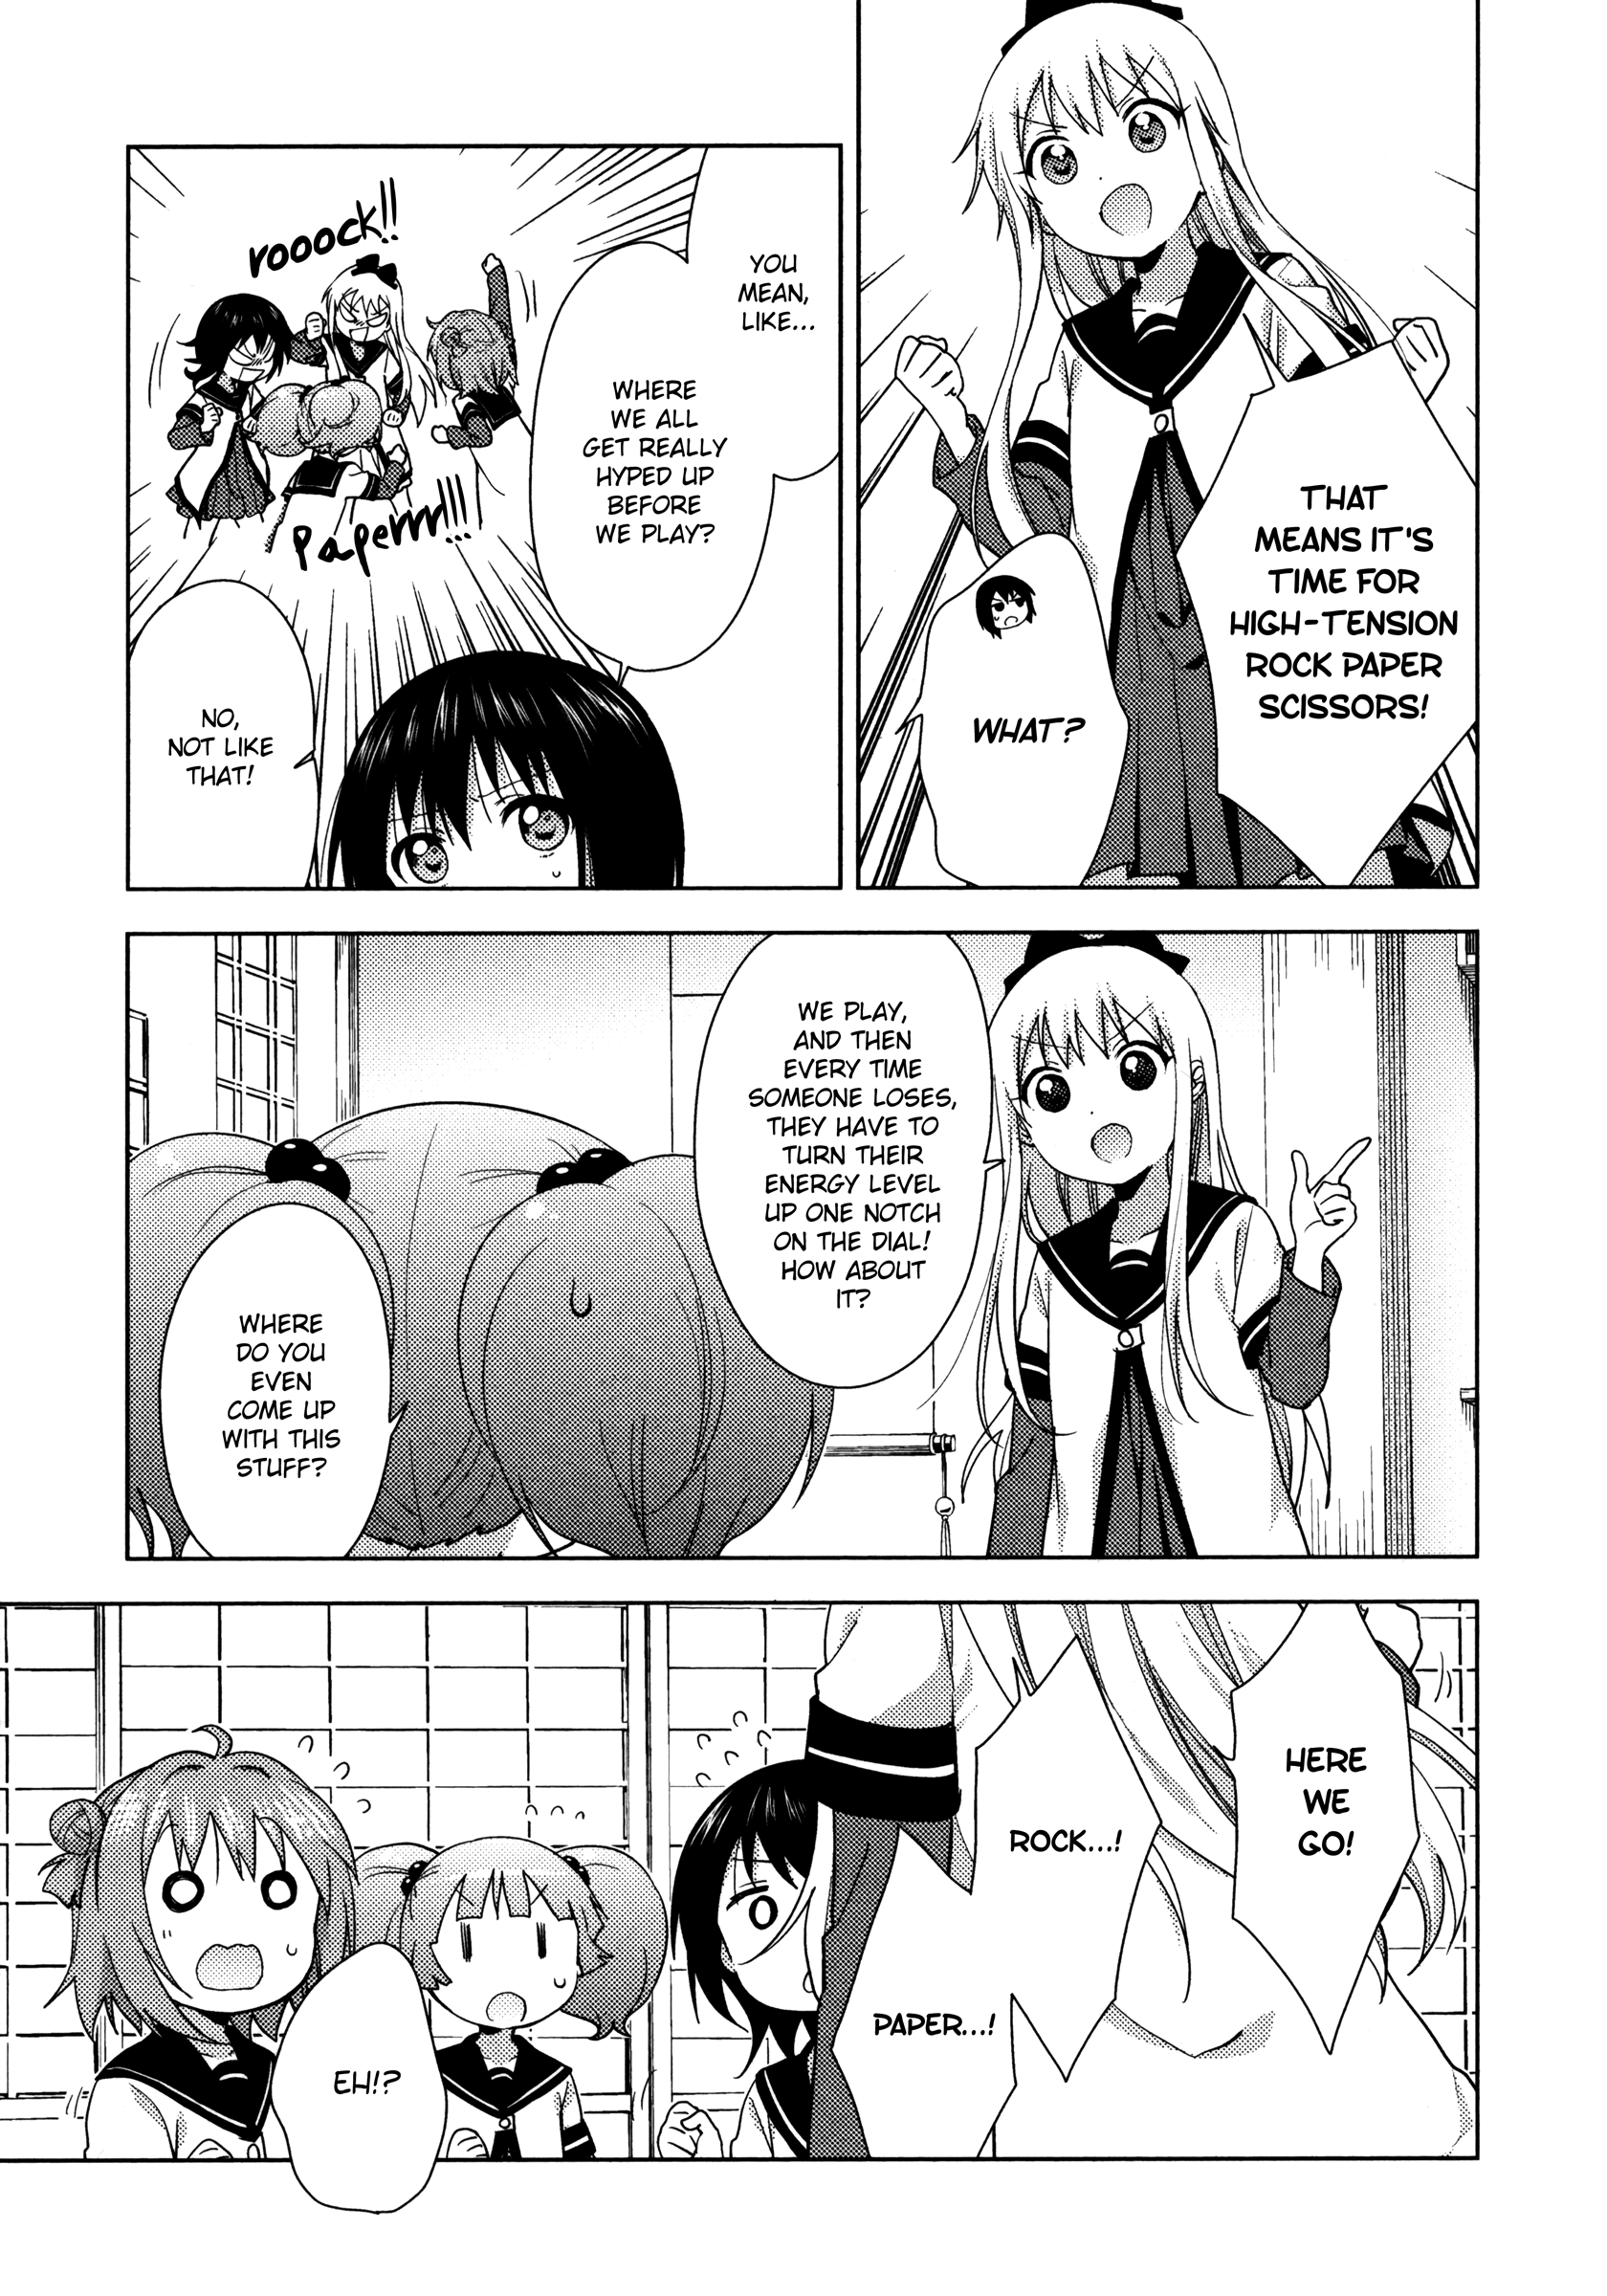 Yuru Yuri Vol.17 Chapter 129: Energy Levels That Shouldn't Even Be Possible - Picture 3